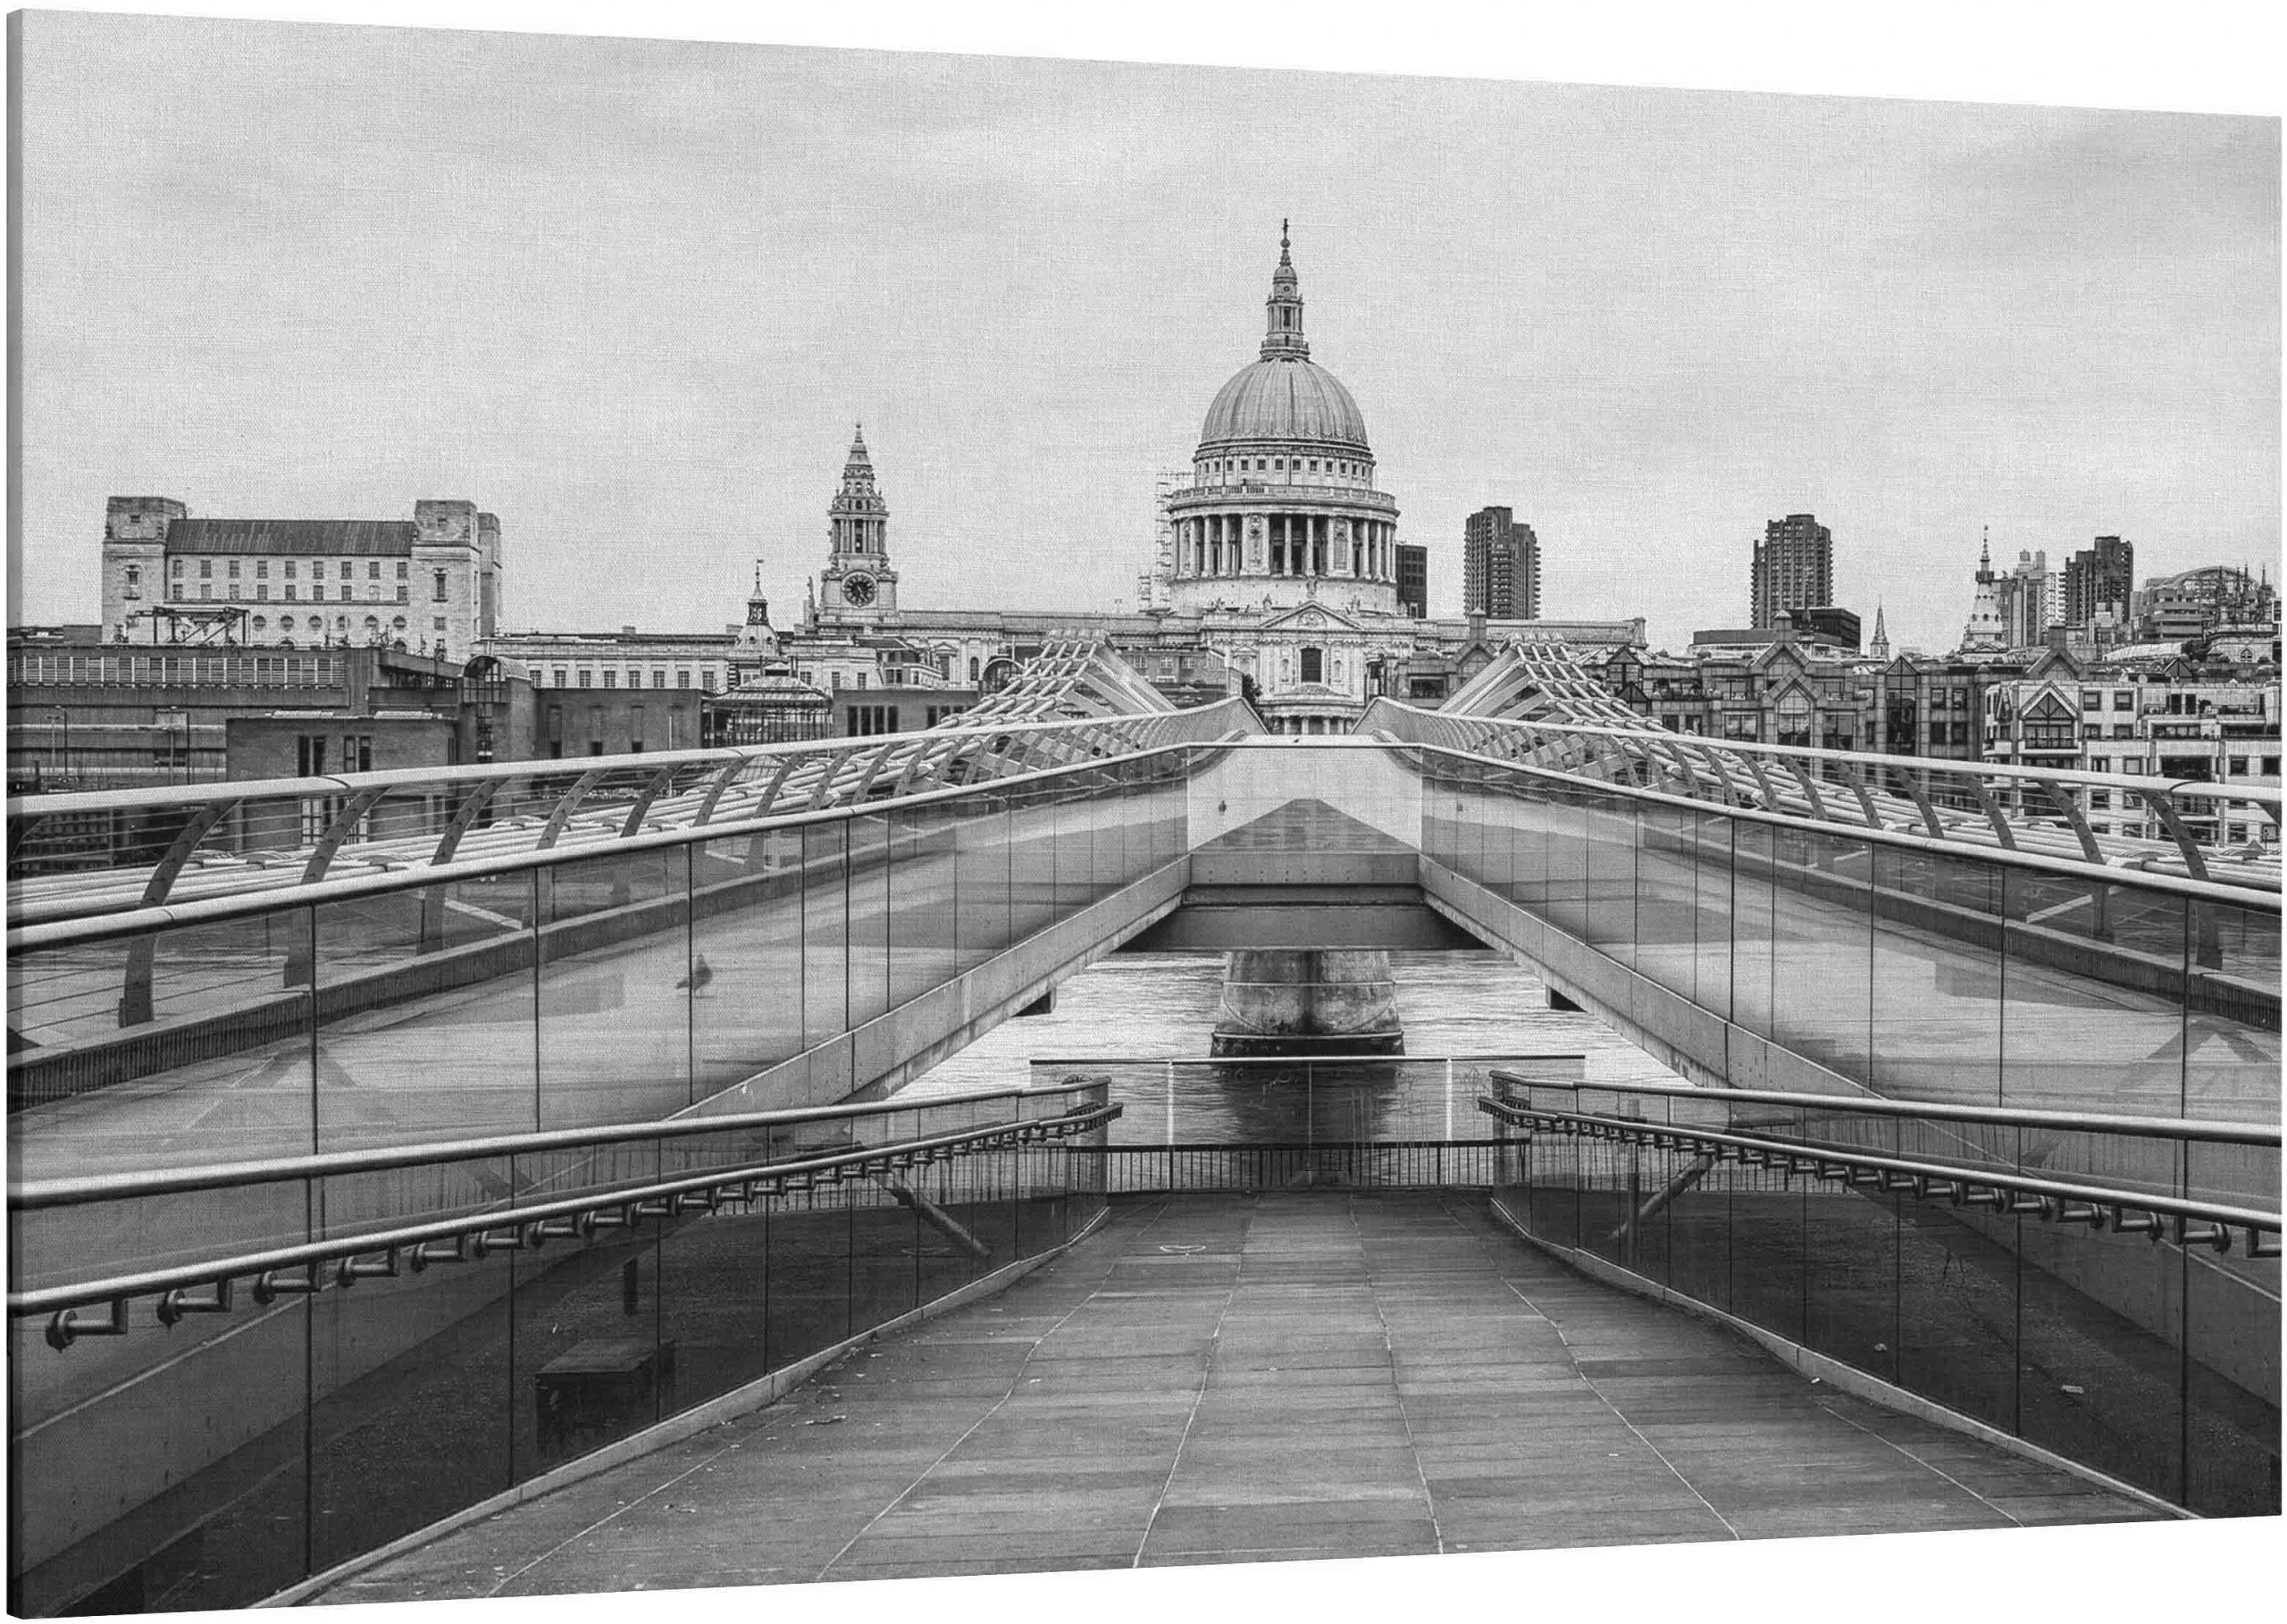 St Pauls's Cathedral